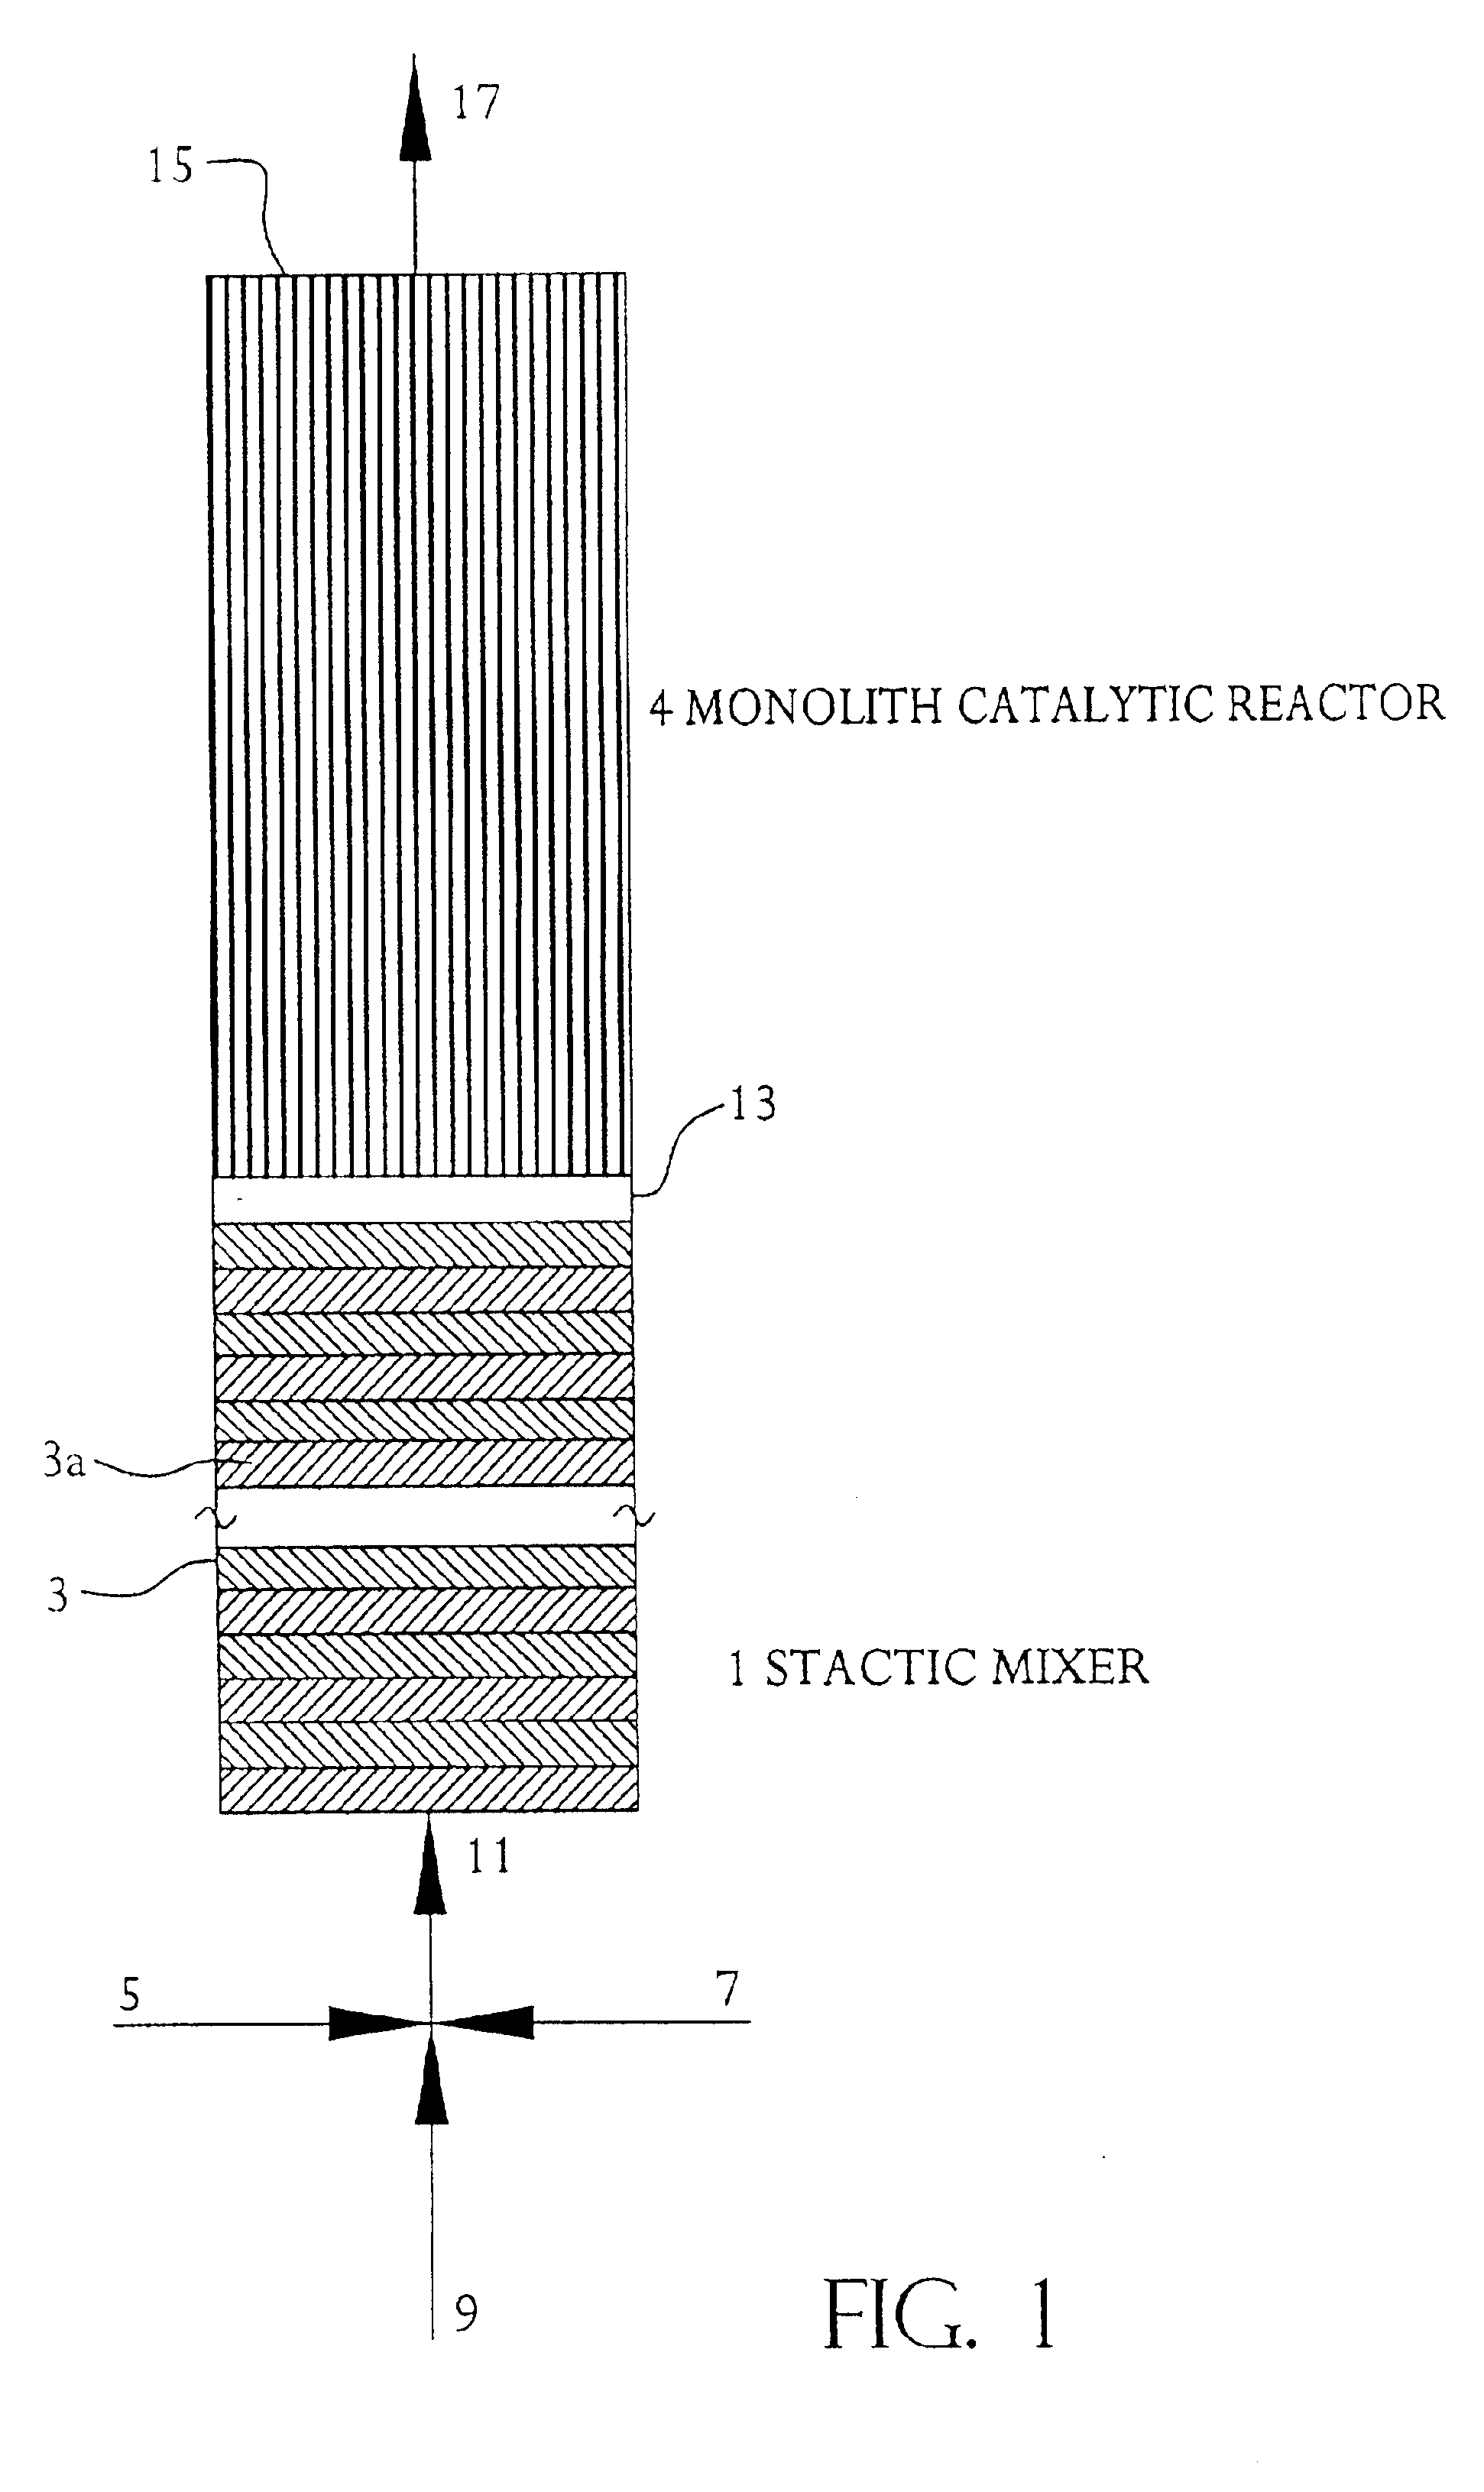 Monolith catalytic reactor coupled to static mixer